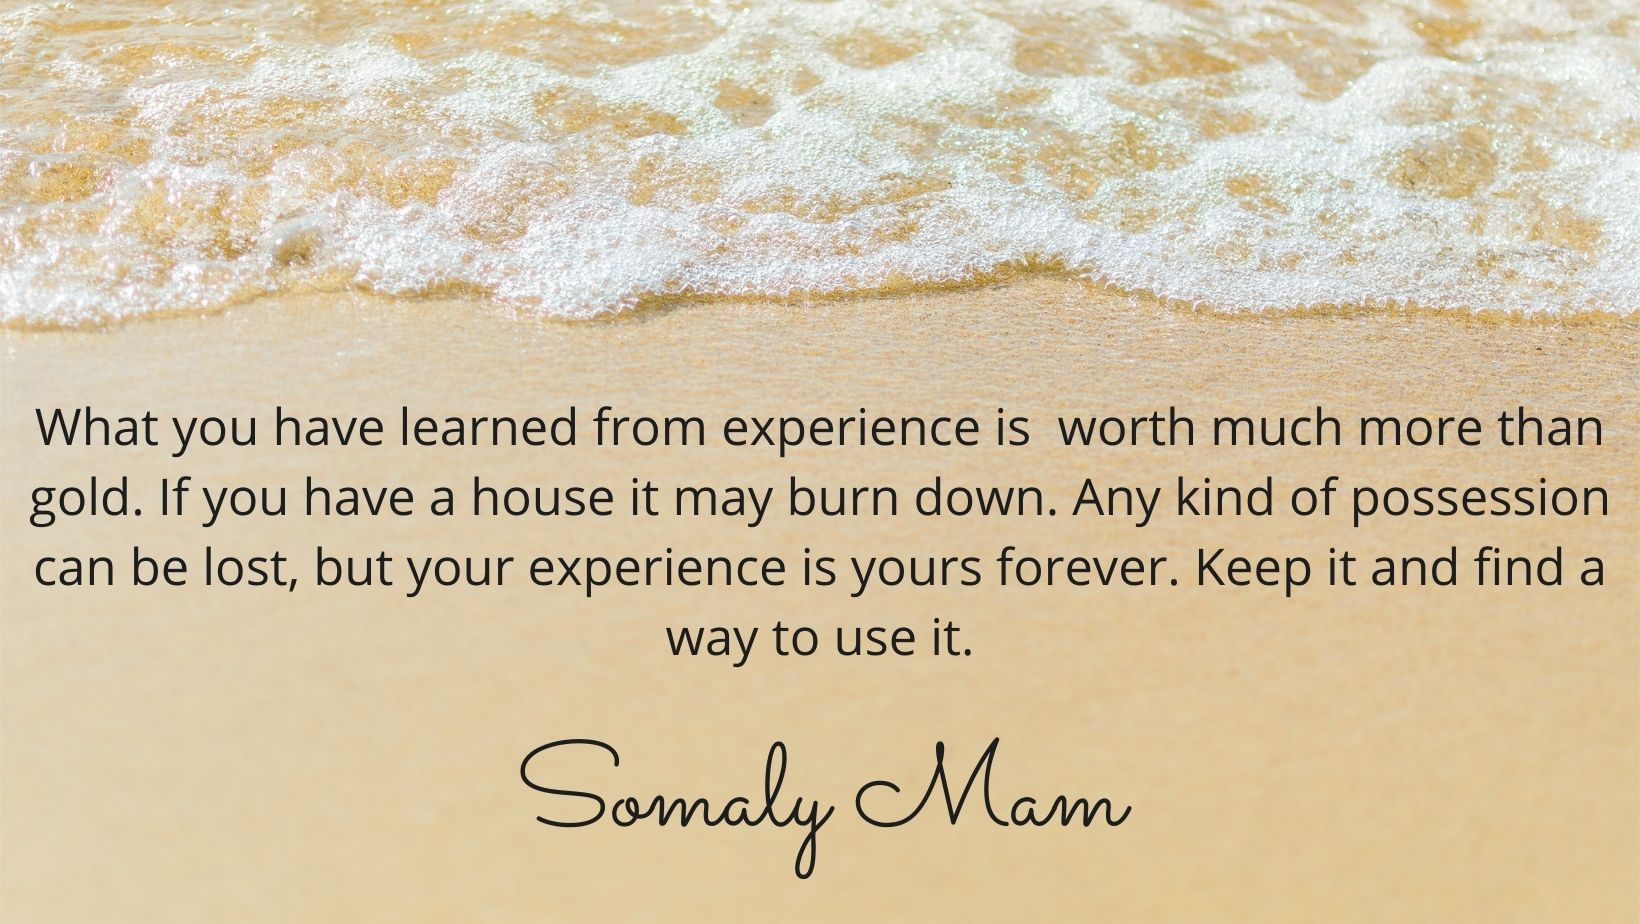 Image contains a photo of sand with the tide coming in. There is a quote by Somaly Mam in black text over the image that says "What you have learned from experience is  worth much more than gold. If you have a house it may burn down. Any kind of possession can be lost, but your experience is yours forever. Keep it and find a way to use it.